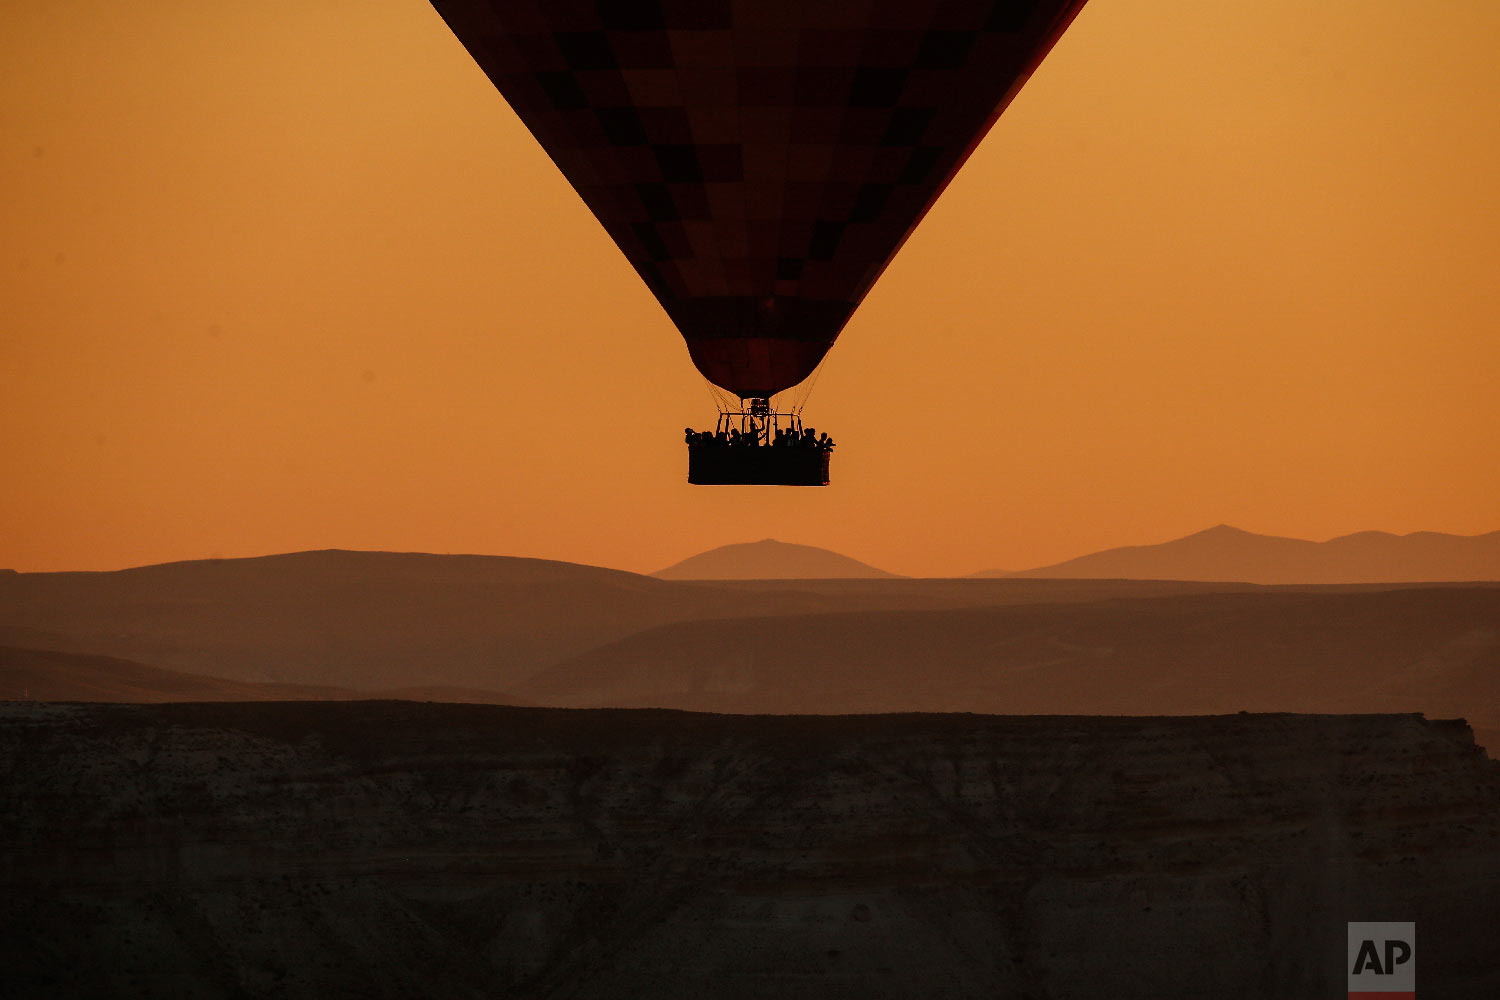  A hot air balloon, carrying tourists, rises into the sky at sunrise in Cappadocia, central Turkey on Aug. 7, 2018. (AP Photo/Emrah Gurel) 